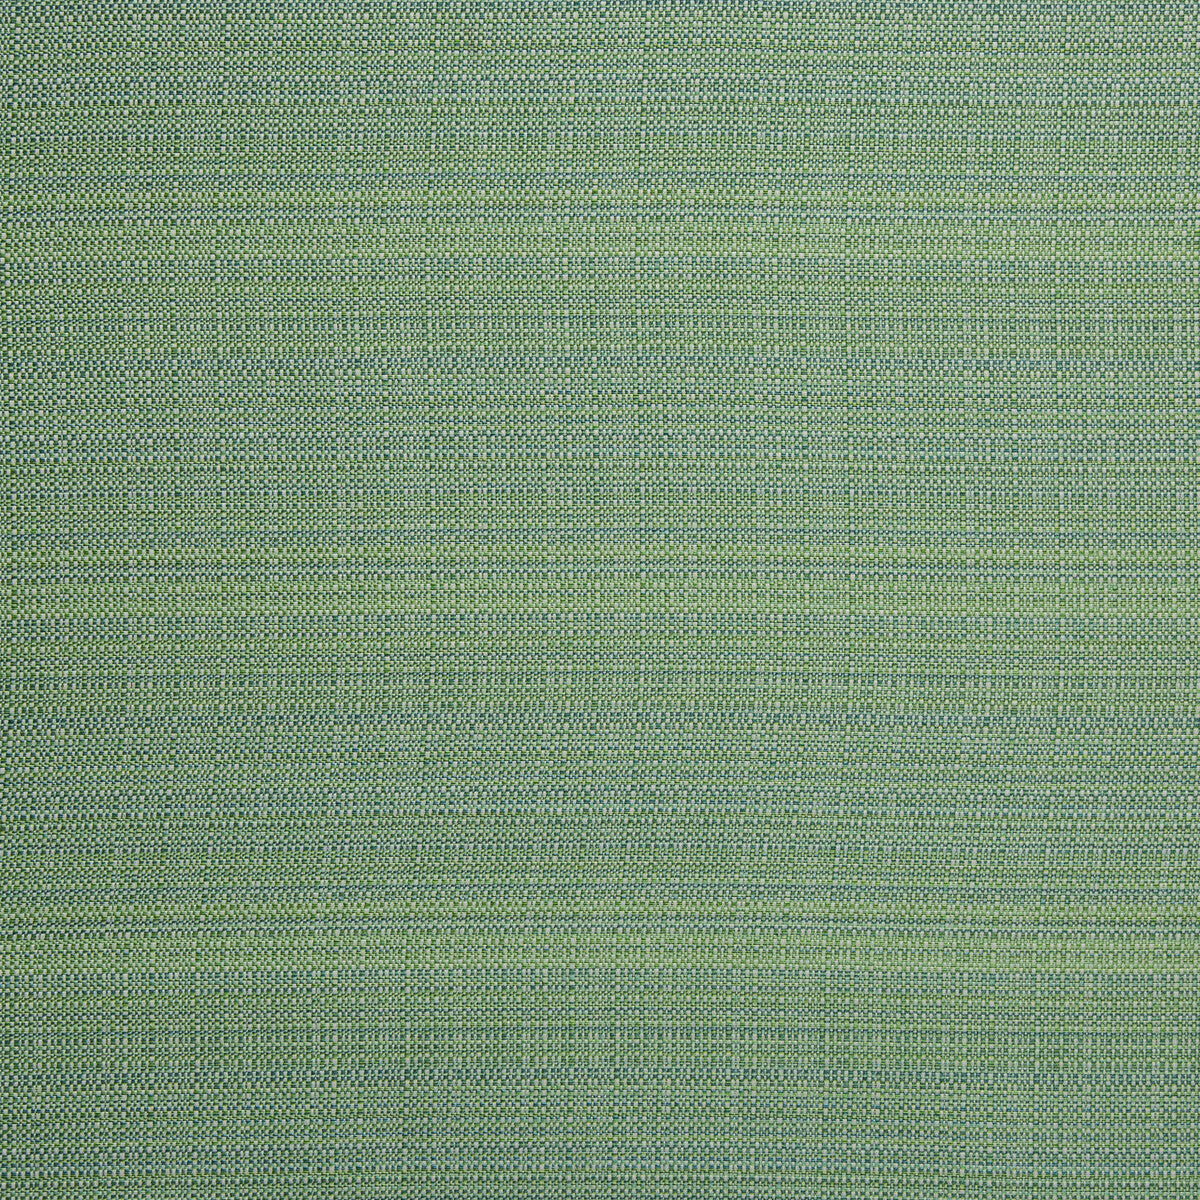 Arroyo fabric in oasis color - pattern 35823.3.0 - by Kravet Design in the Indoor / Outdoor collection